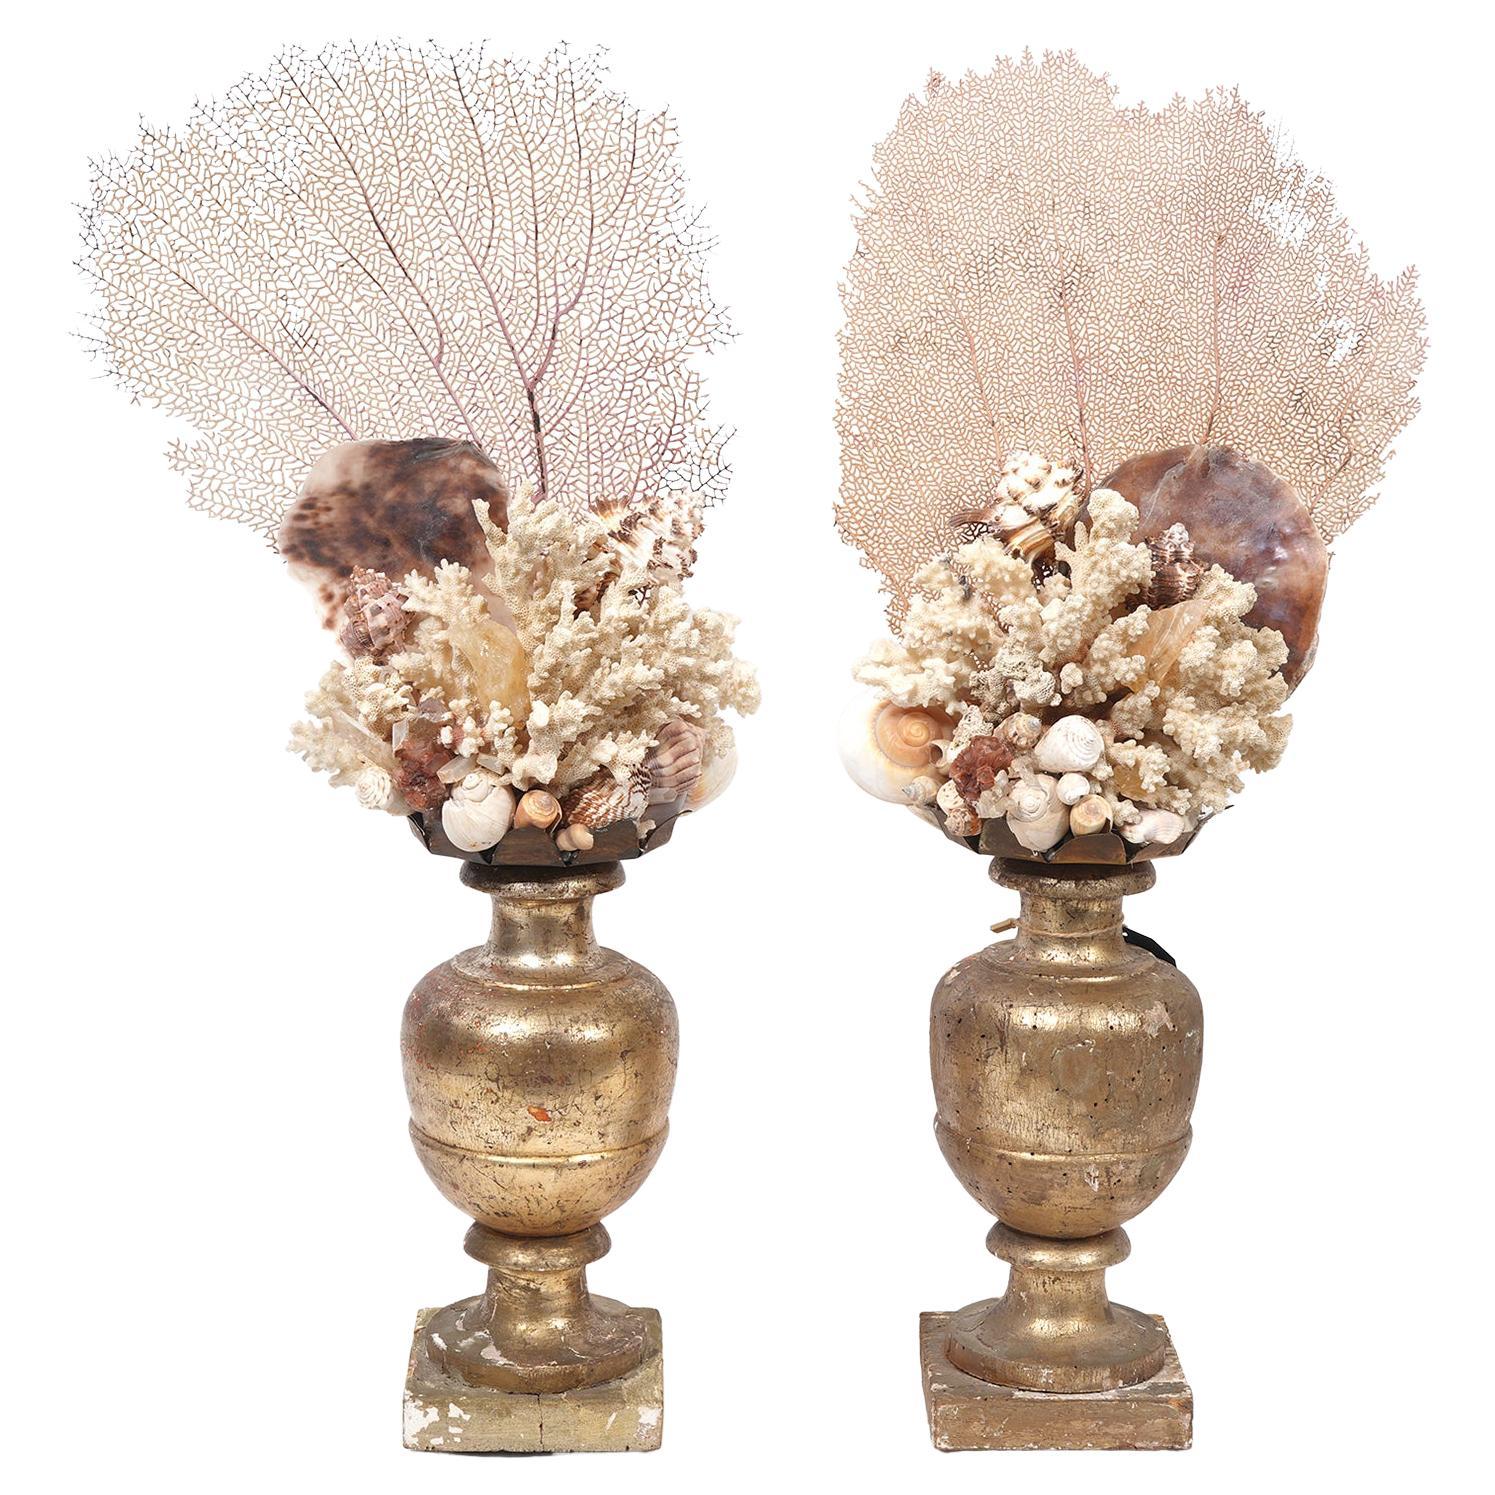 Wonderful Pair of Custom Made Coral Fragments Mounts on Antique Gilt Wood Bases